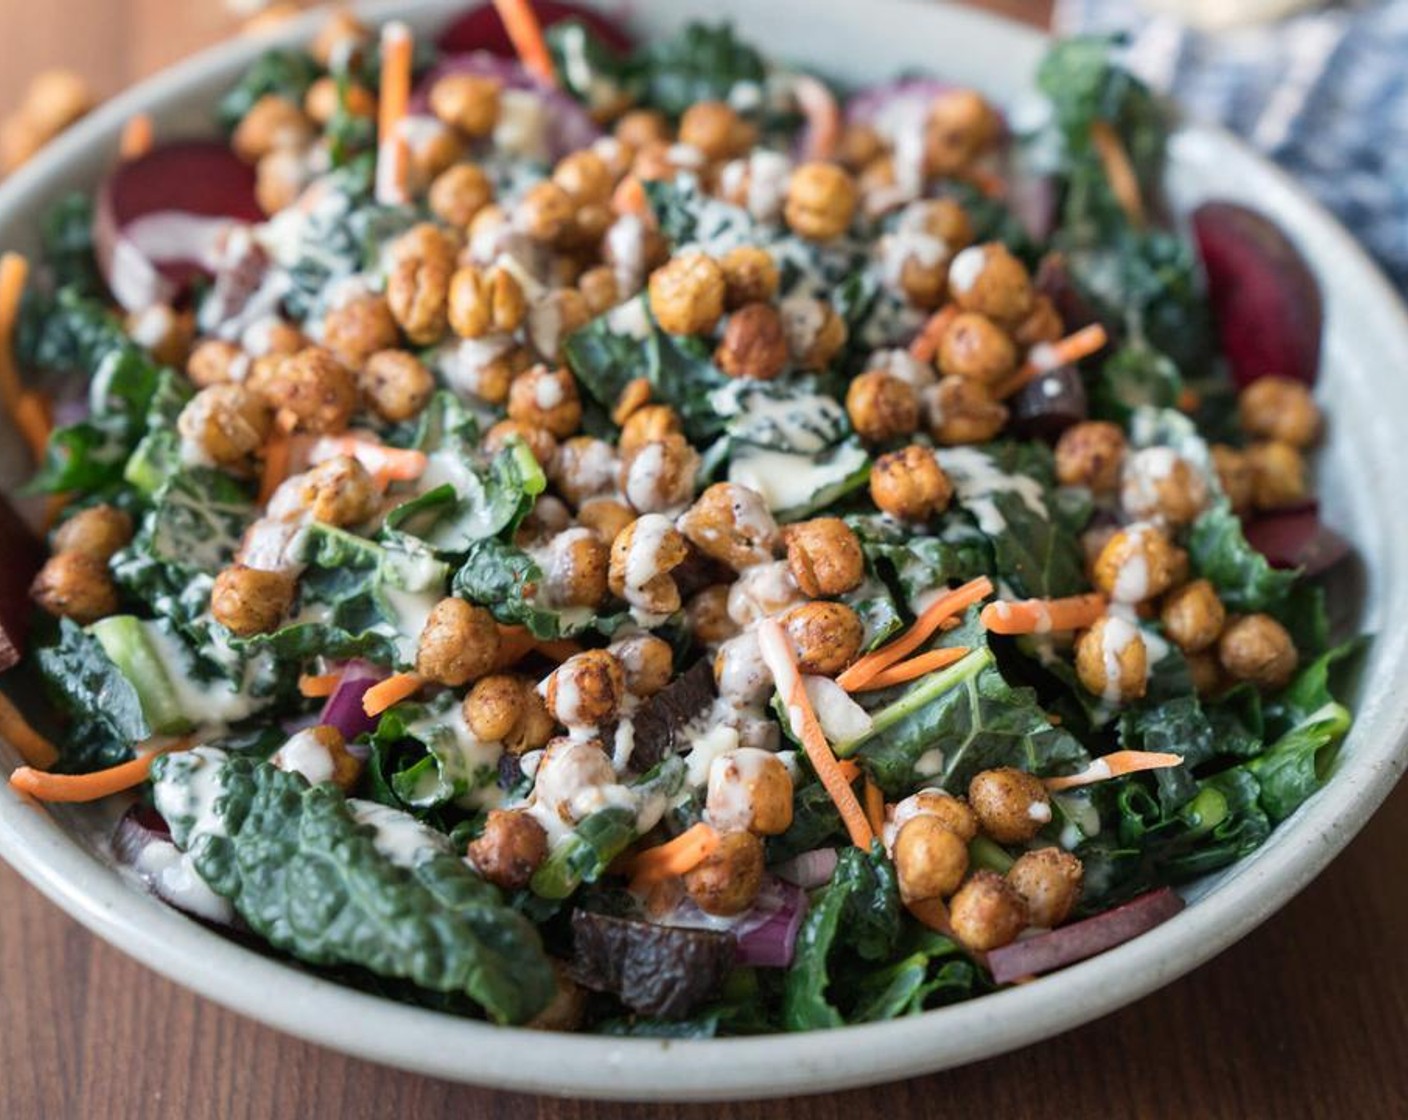 Roasted Chickpea Kale Salad with a Creamy Dressing